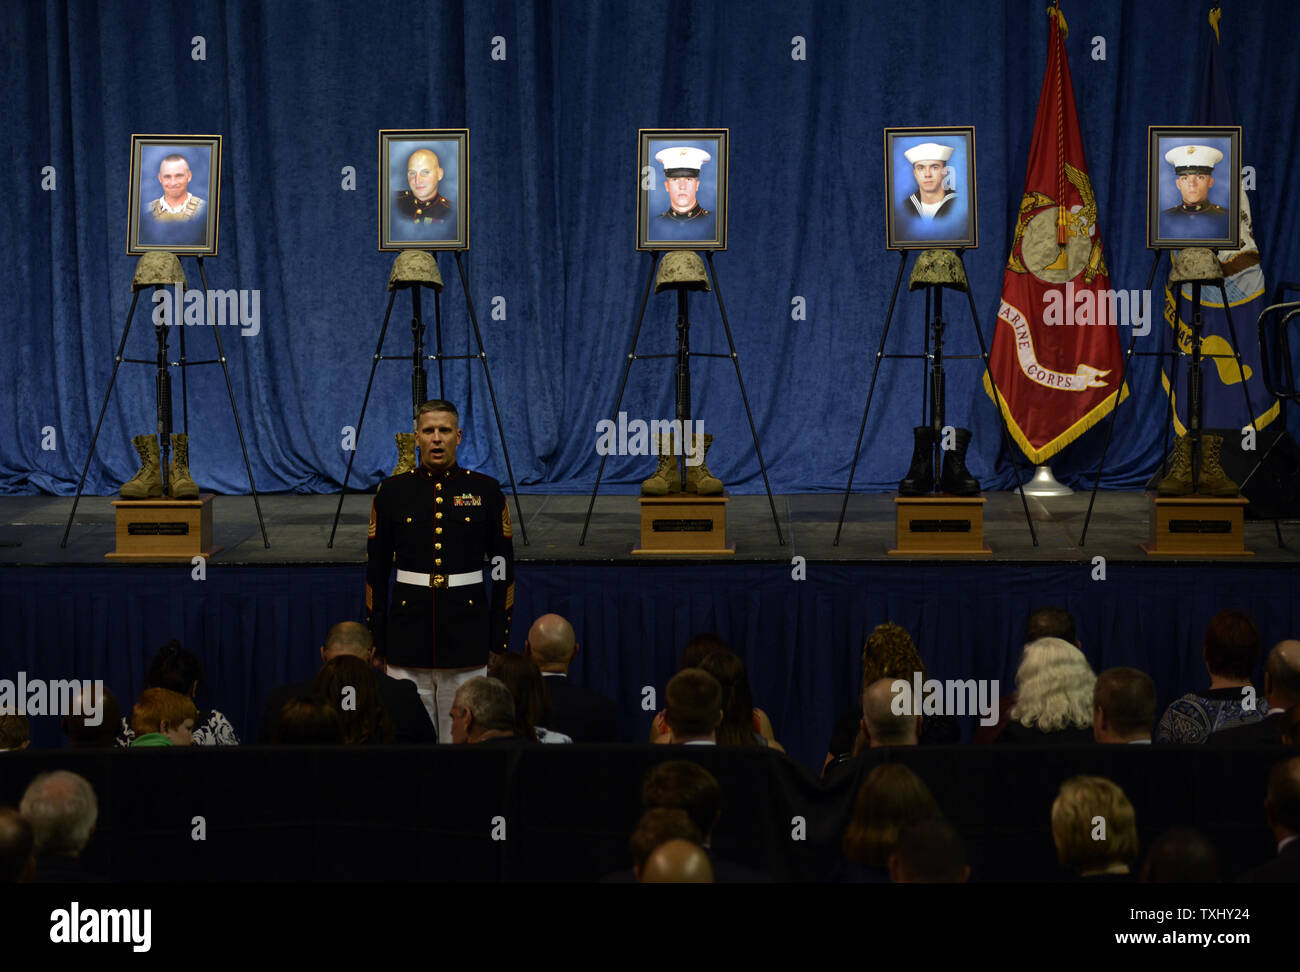 Roll call for Gunnery Sergeant Thomas J. Sullivan , Staff Sergeant David Wyatt, Sergeant Carson Holmquist, Logistics Specialist 2nd class Randall Smith and Lance Corporal Skip Wells at a ceremony in remembrance of four Marines and a sailor who were killed in attacks at two military facilities in Chattanooga, Tennessee on August 15, 2015. Photo by Billy Weeks/UPI Stock Photo